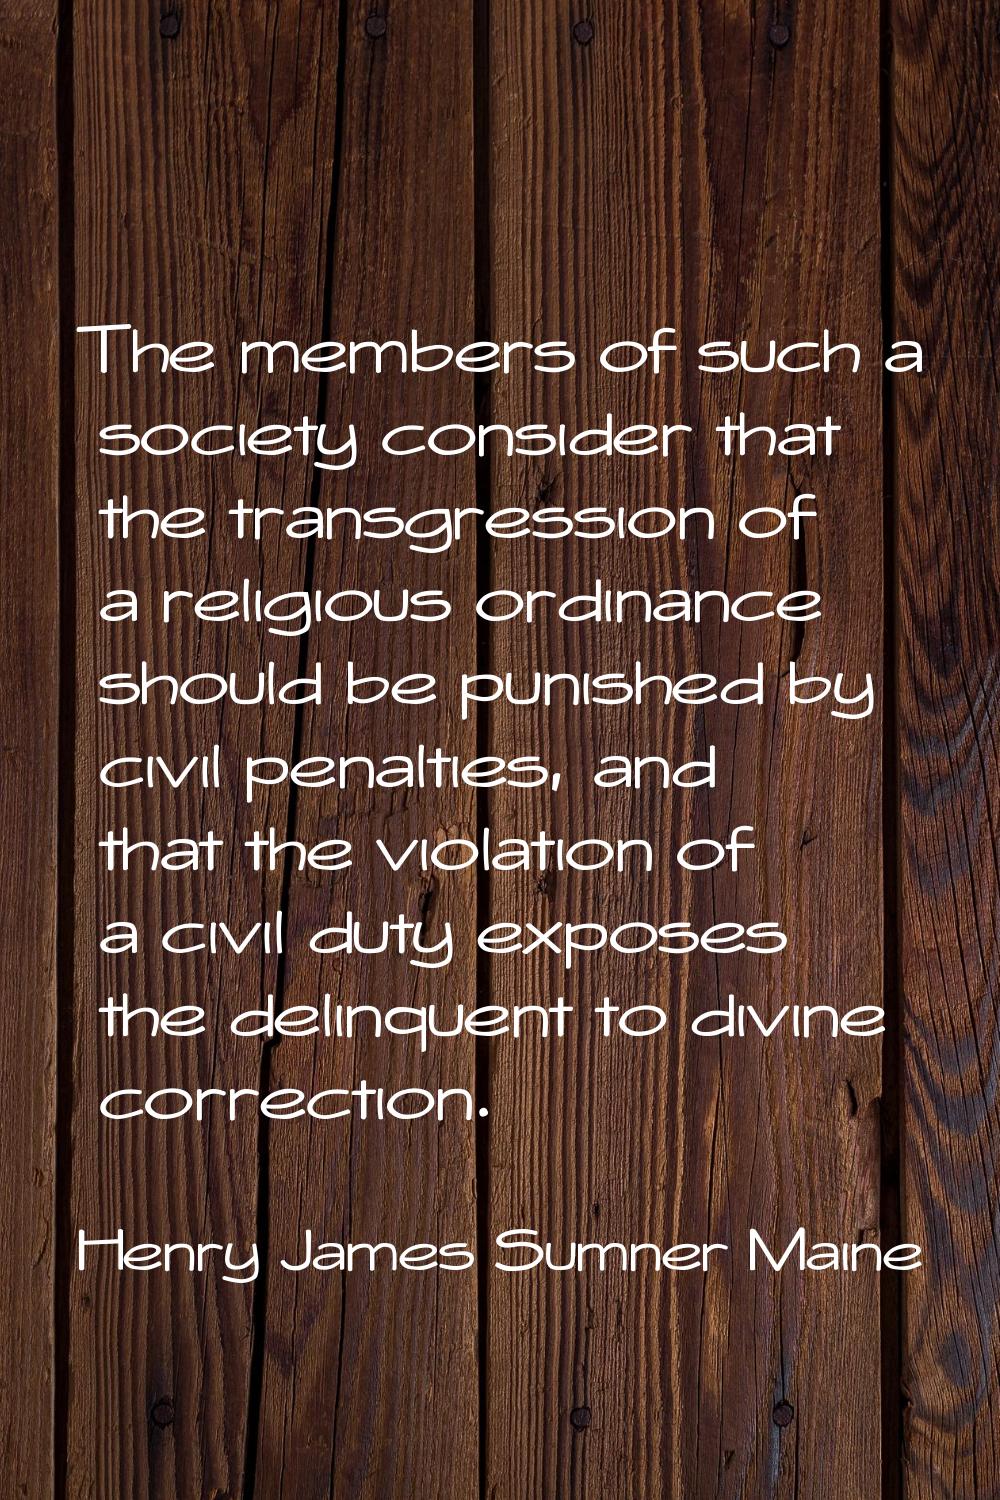 The members of such a society consider that the transgression of a religious ordinance should be pu